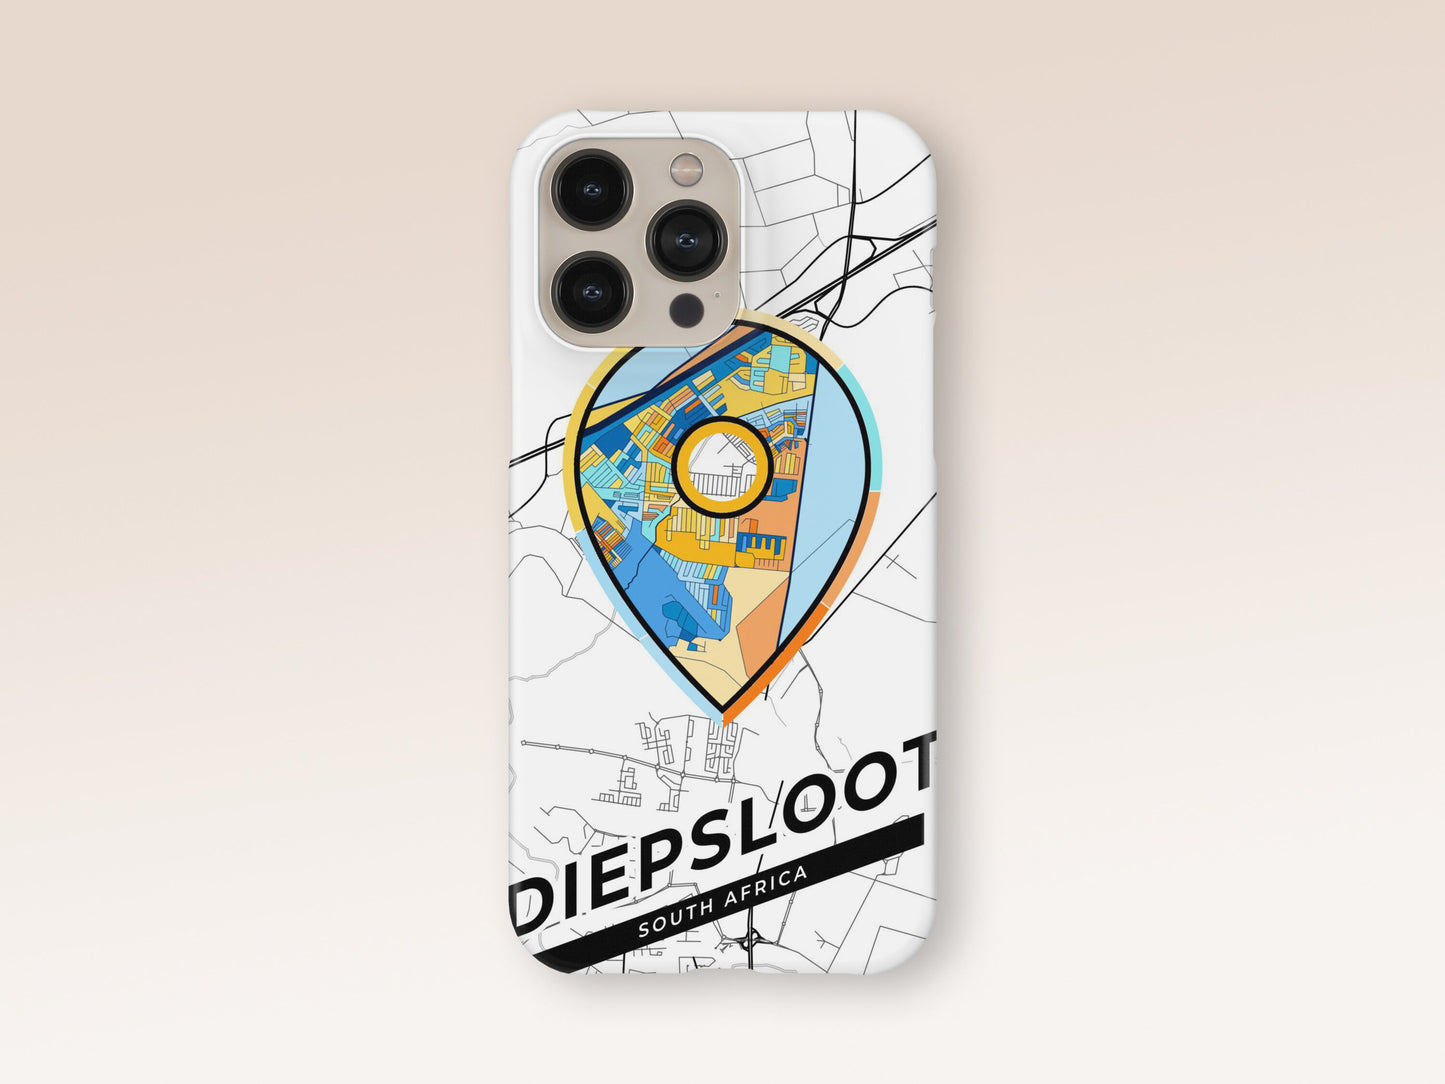 Diepsloot South Africa slim phone case with colorful icon. Birthday, wedding or housewarming gift. Couple match cases. 1